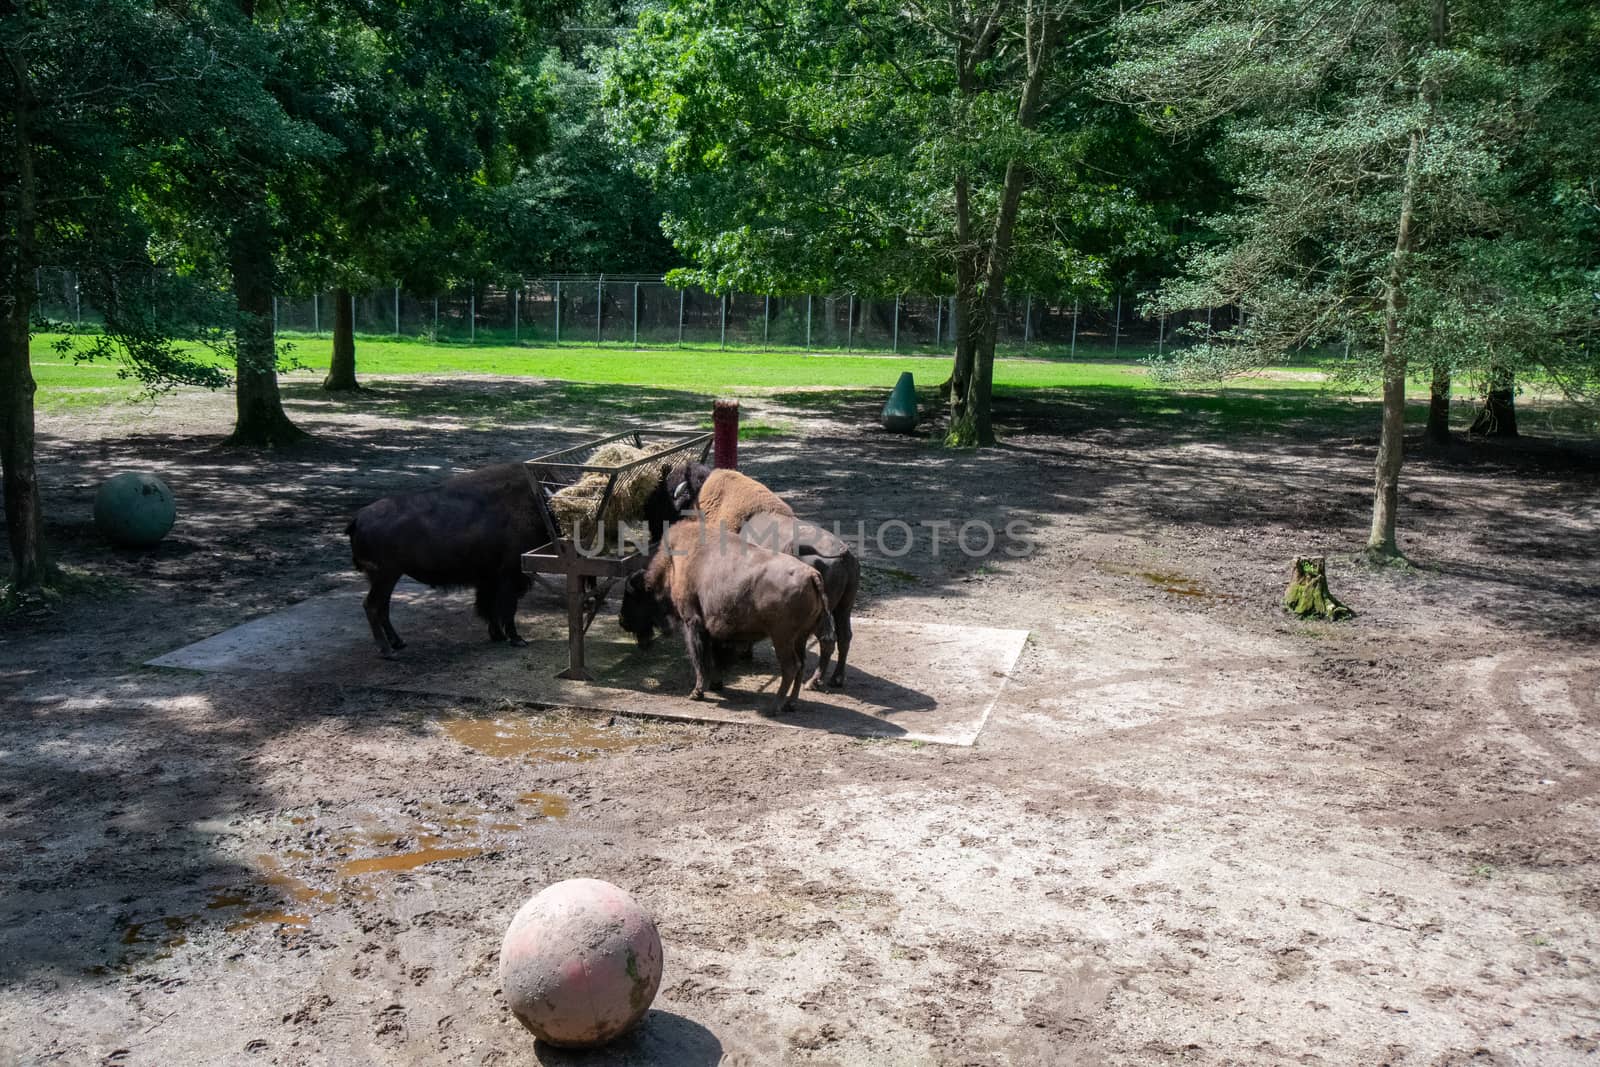 A Group of Buffallo Eating Hay in an Enclosure in a Zoo by bju12290